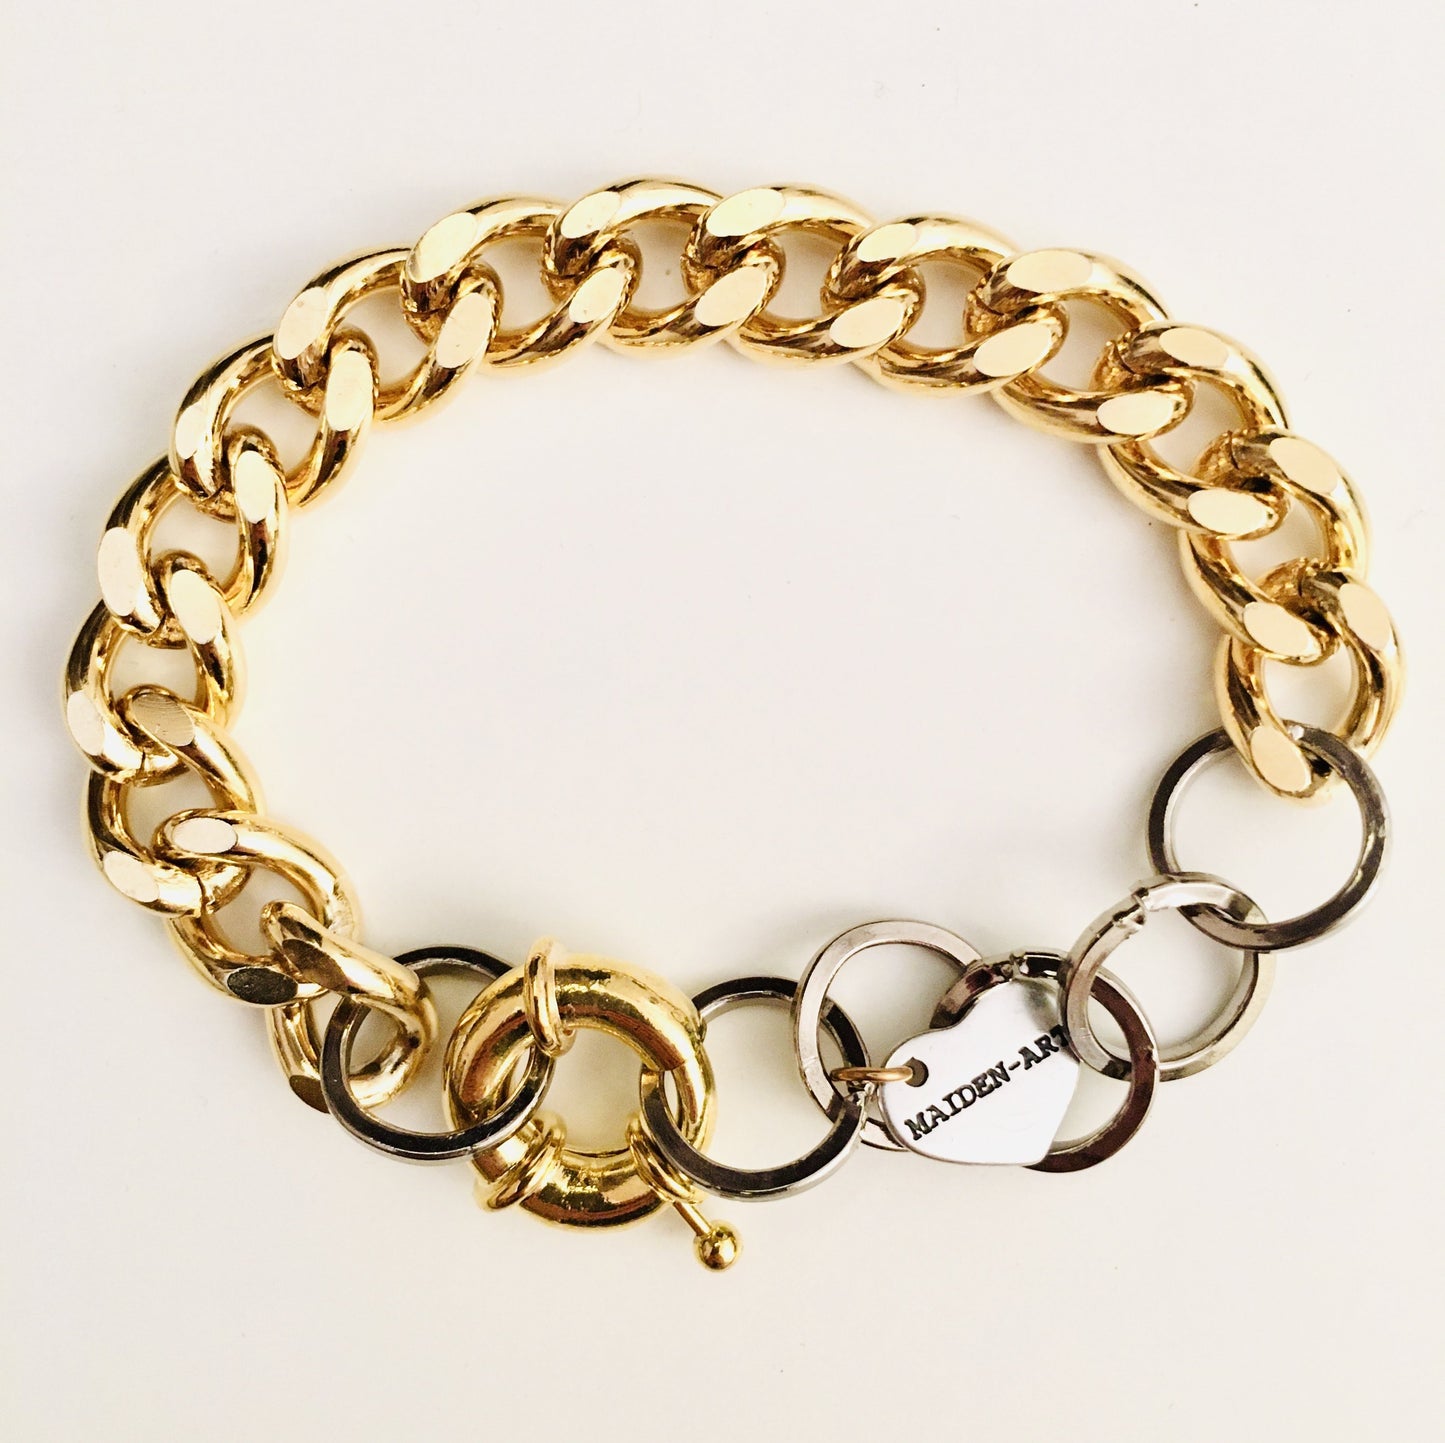 18kt Gold plated Curb chain bracelet and rudder clasp. Gold Curb Chain